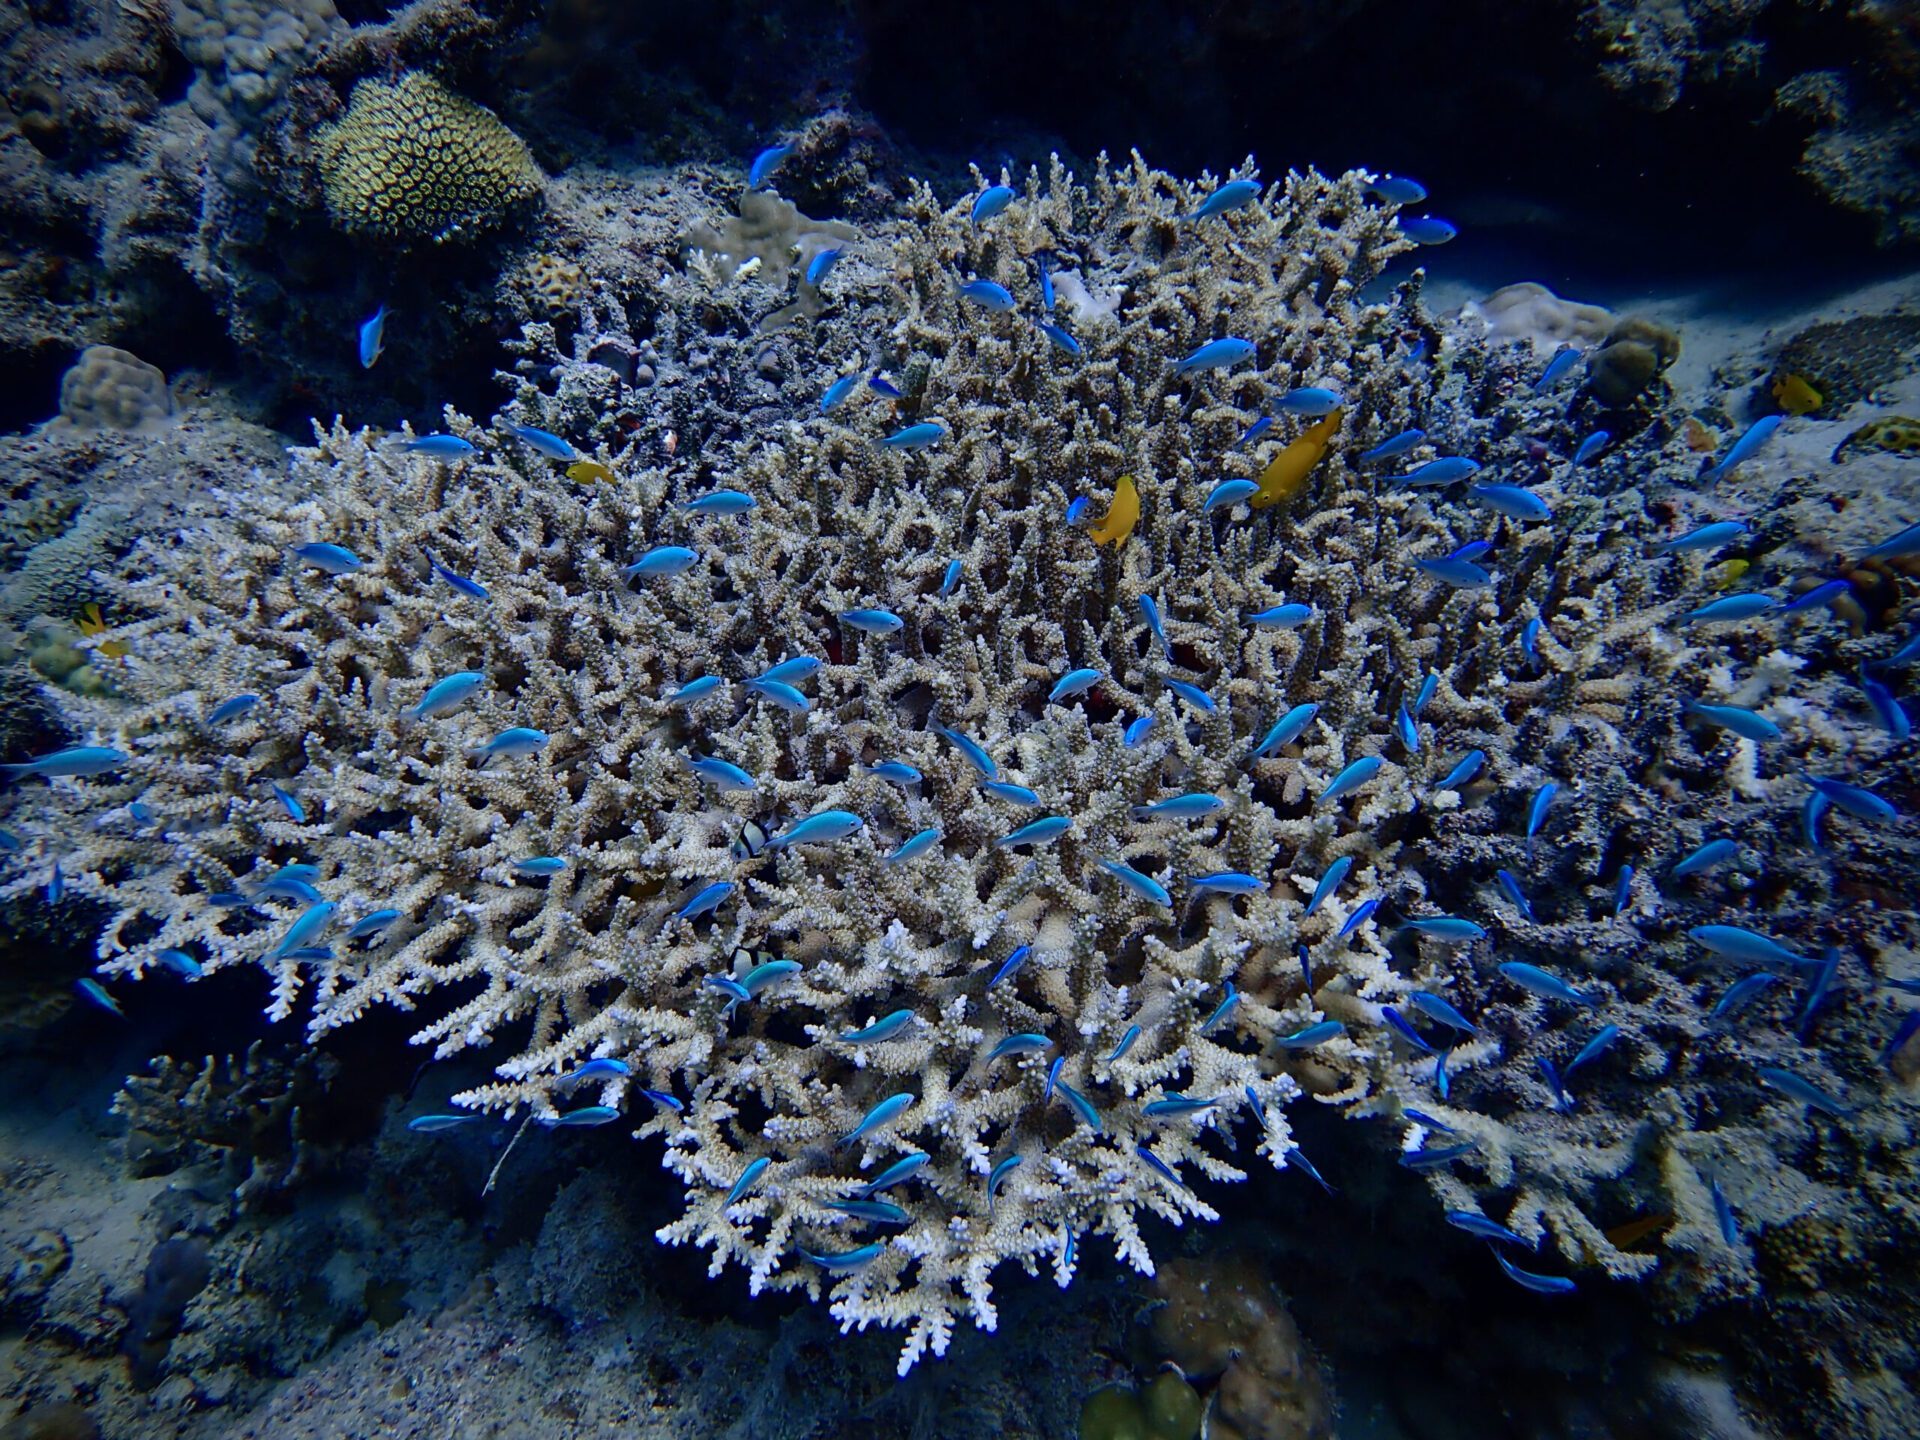 Photograph showcasing the rich biodiversity and vibrant colors of an Okinawan coral reef.